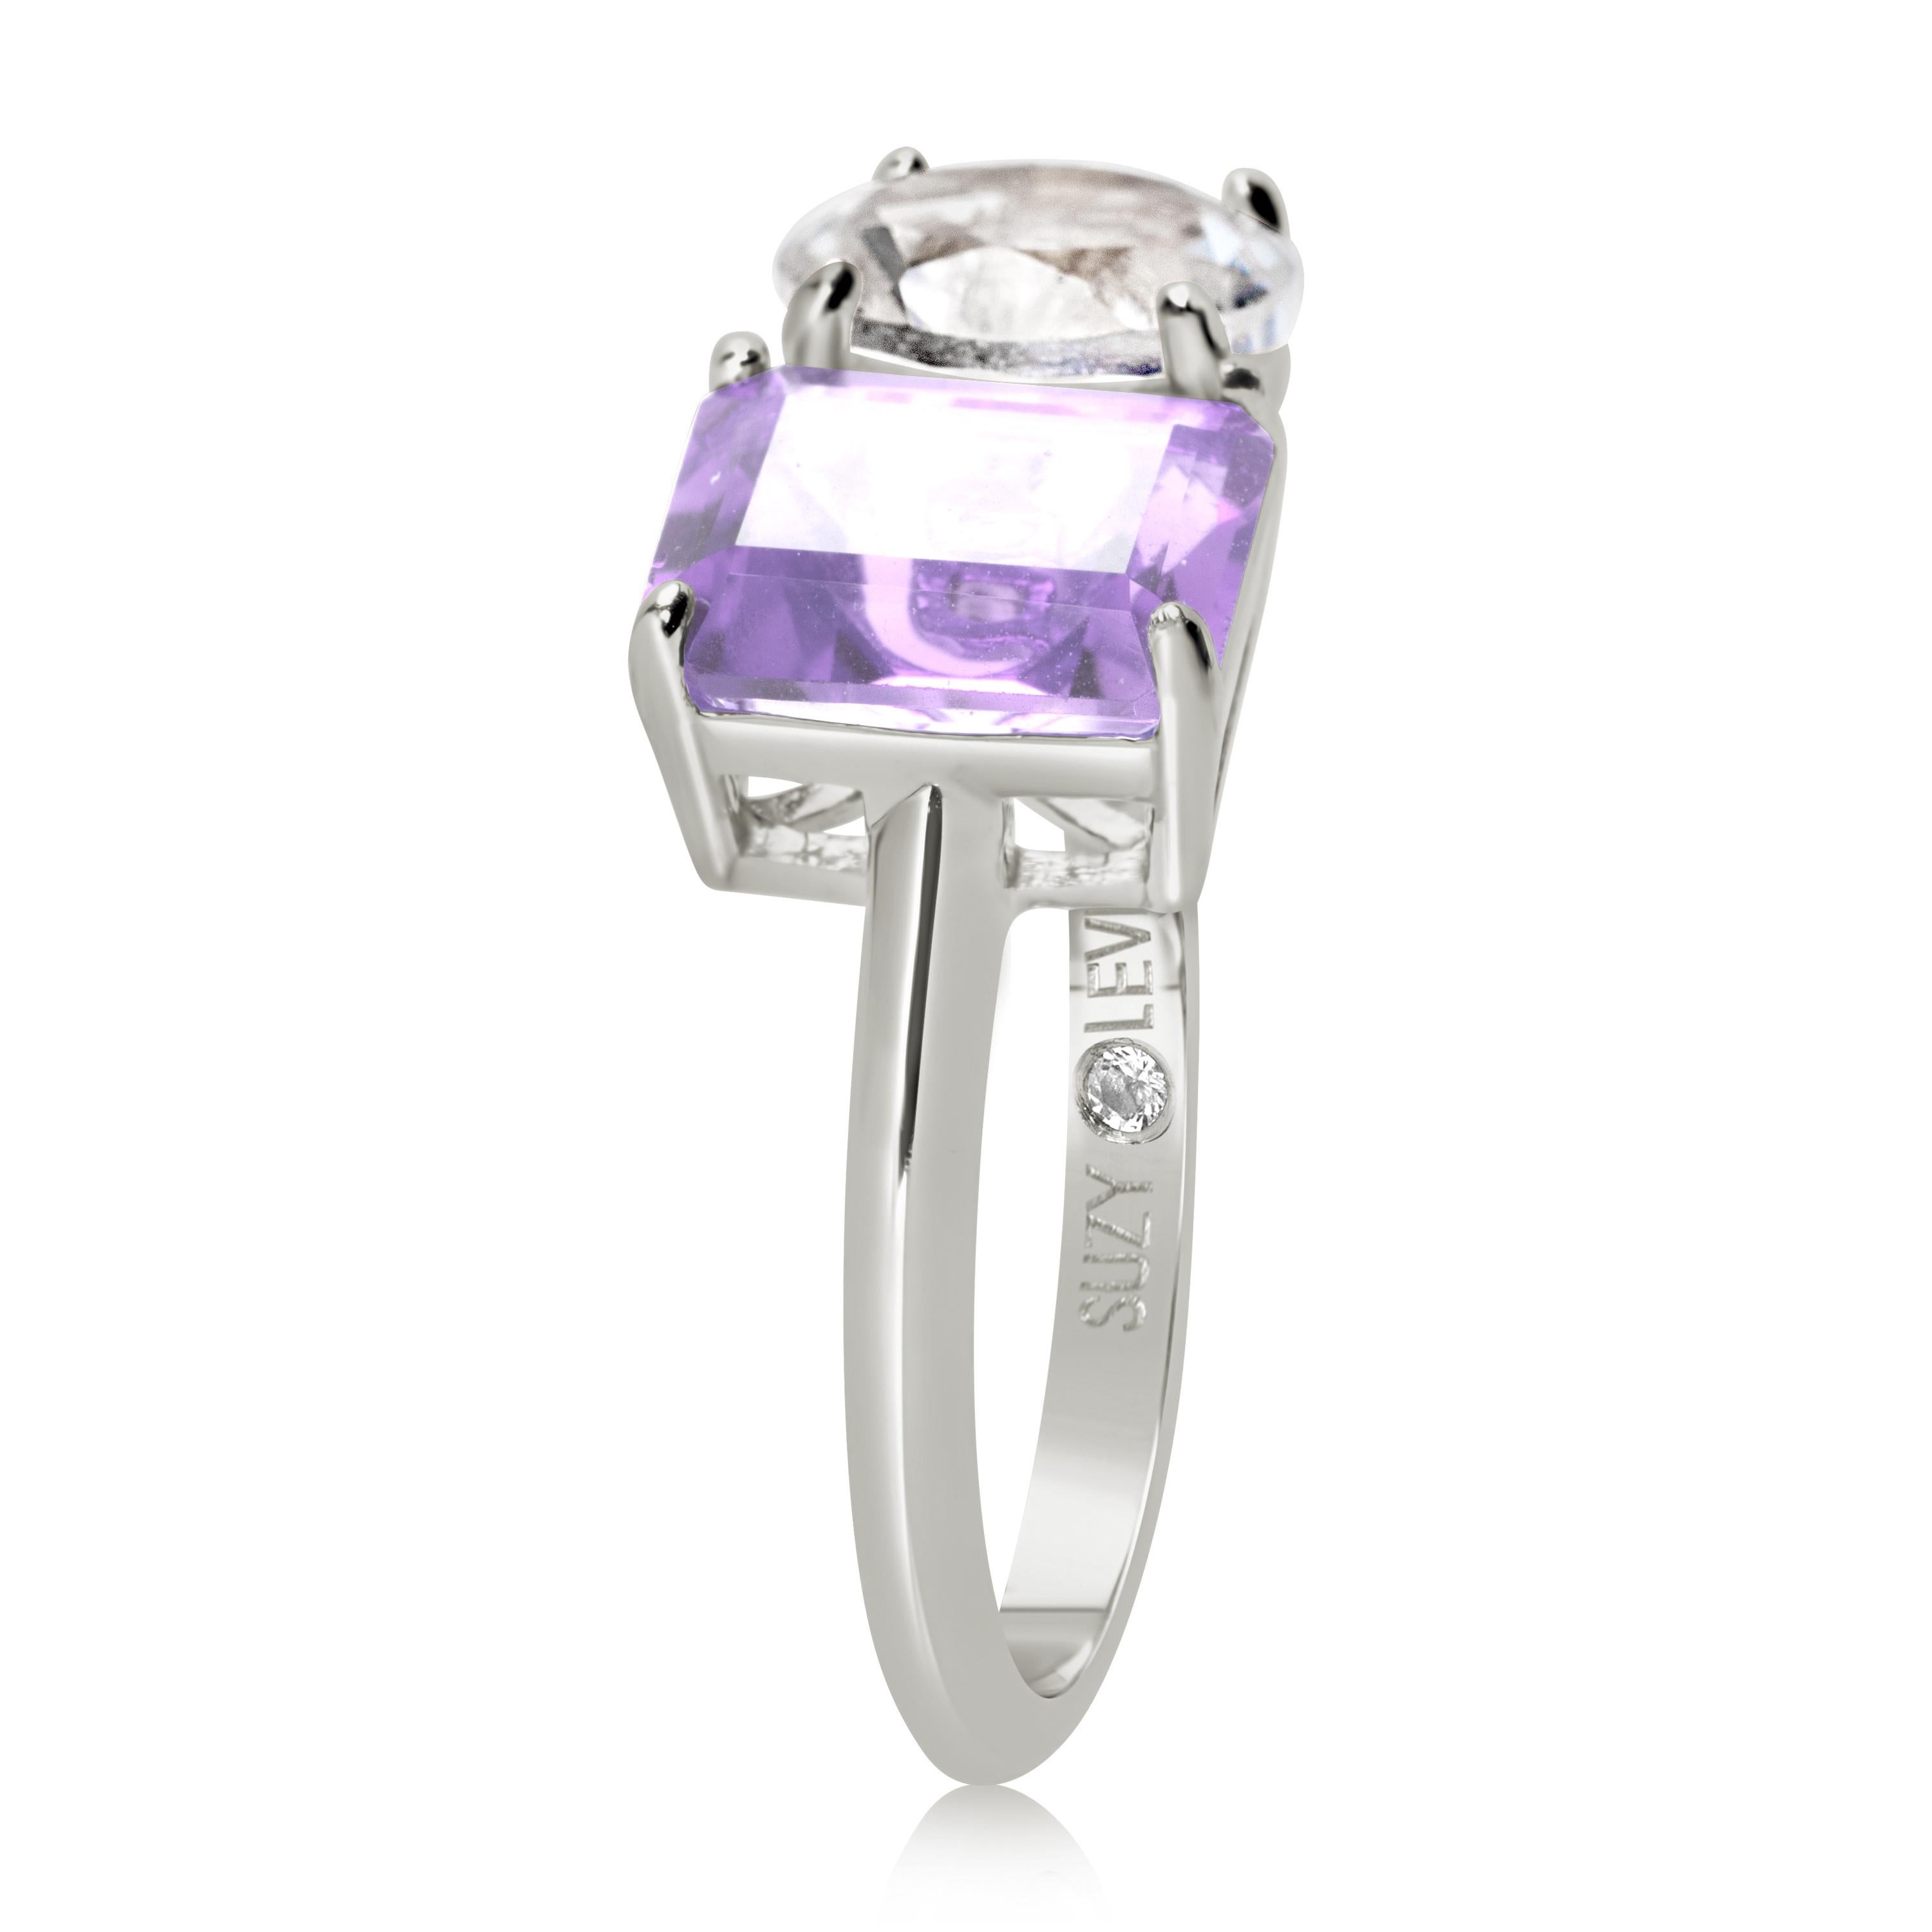 Shimmering in hues of white and purple, this Suzy Levian ring is as on trend as can be, and features a round cut white topaz and an emerald cut purple amethyst as a perfectly matched pair. This ring symbolizes a perfect pairing of unique shapes.